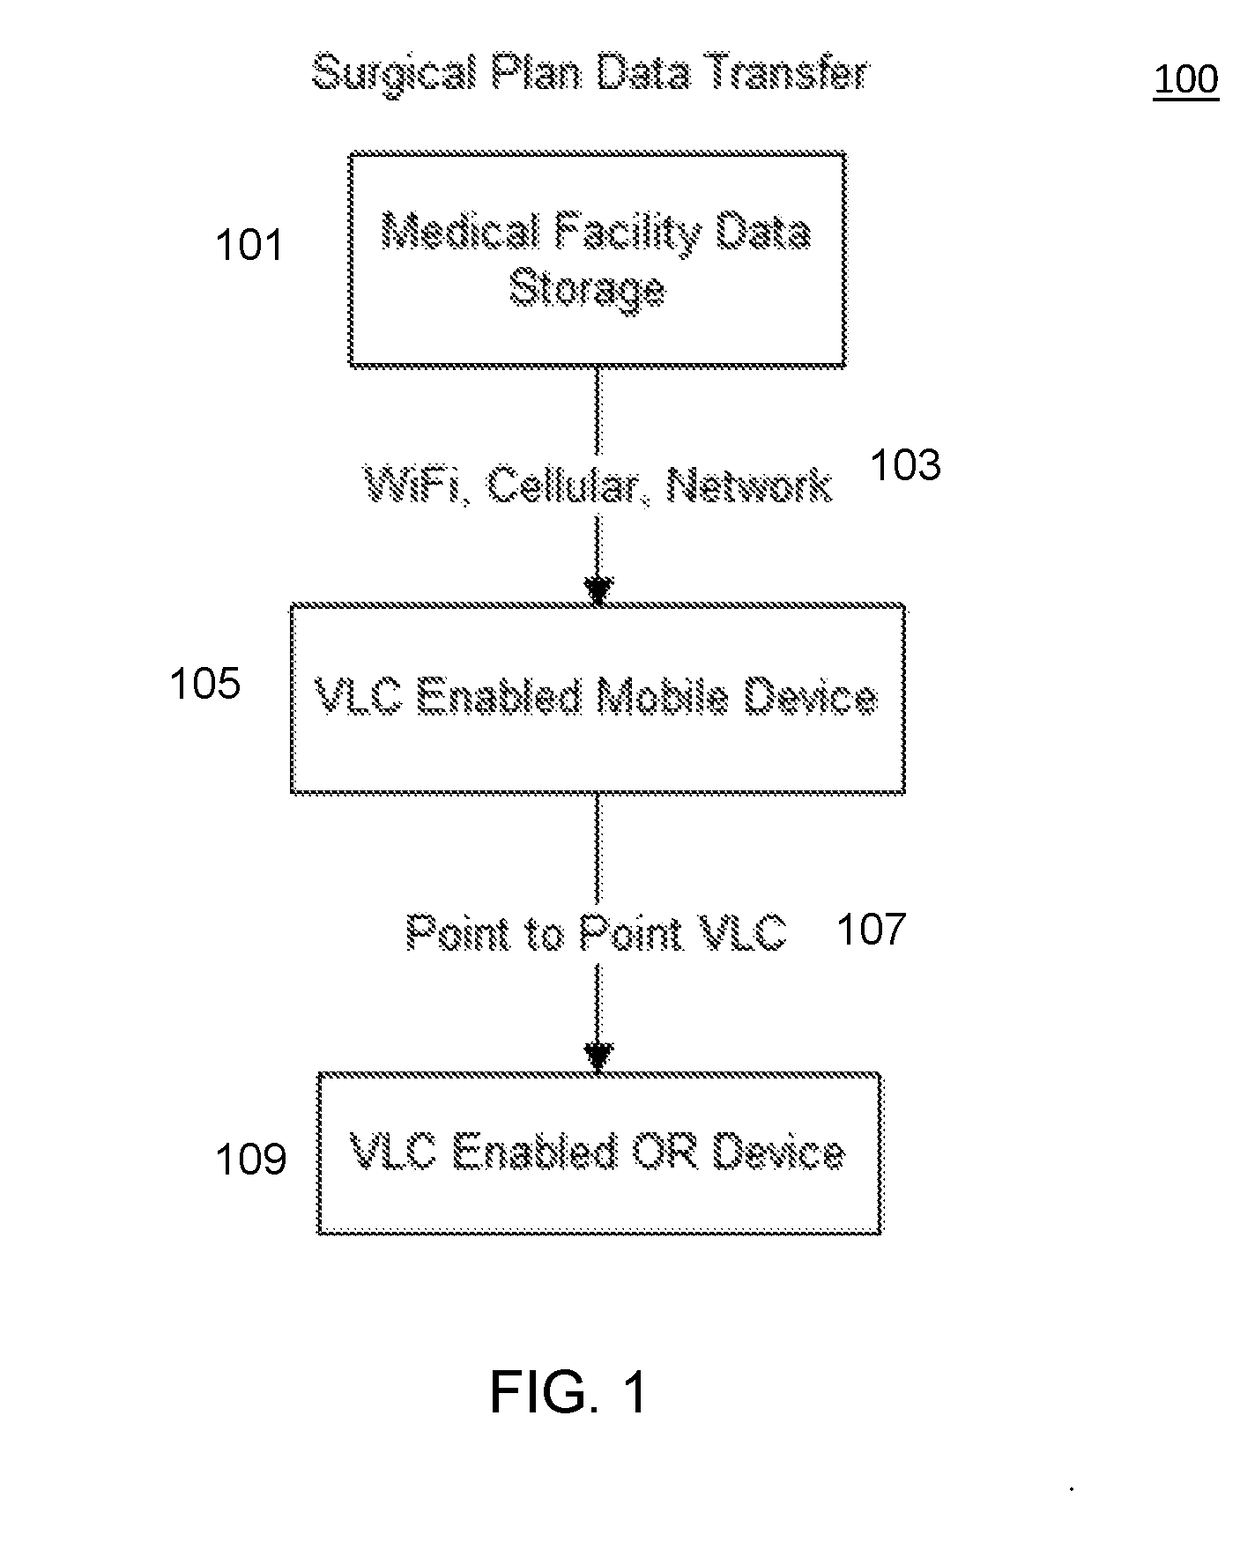 Method and system for managing medical data